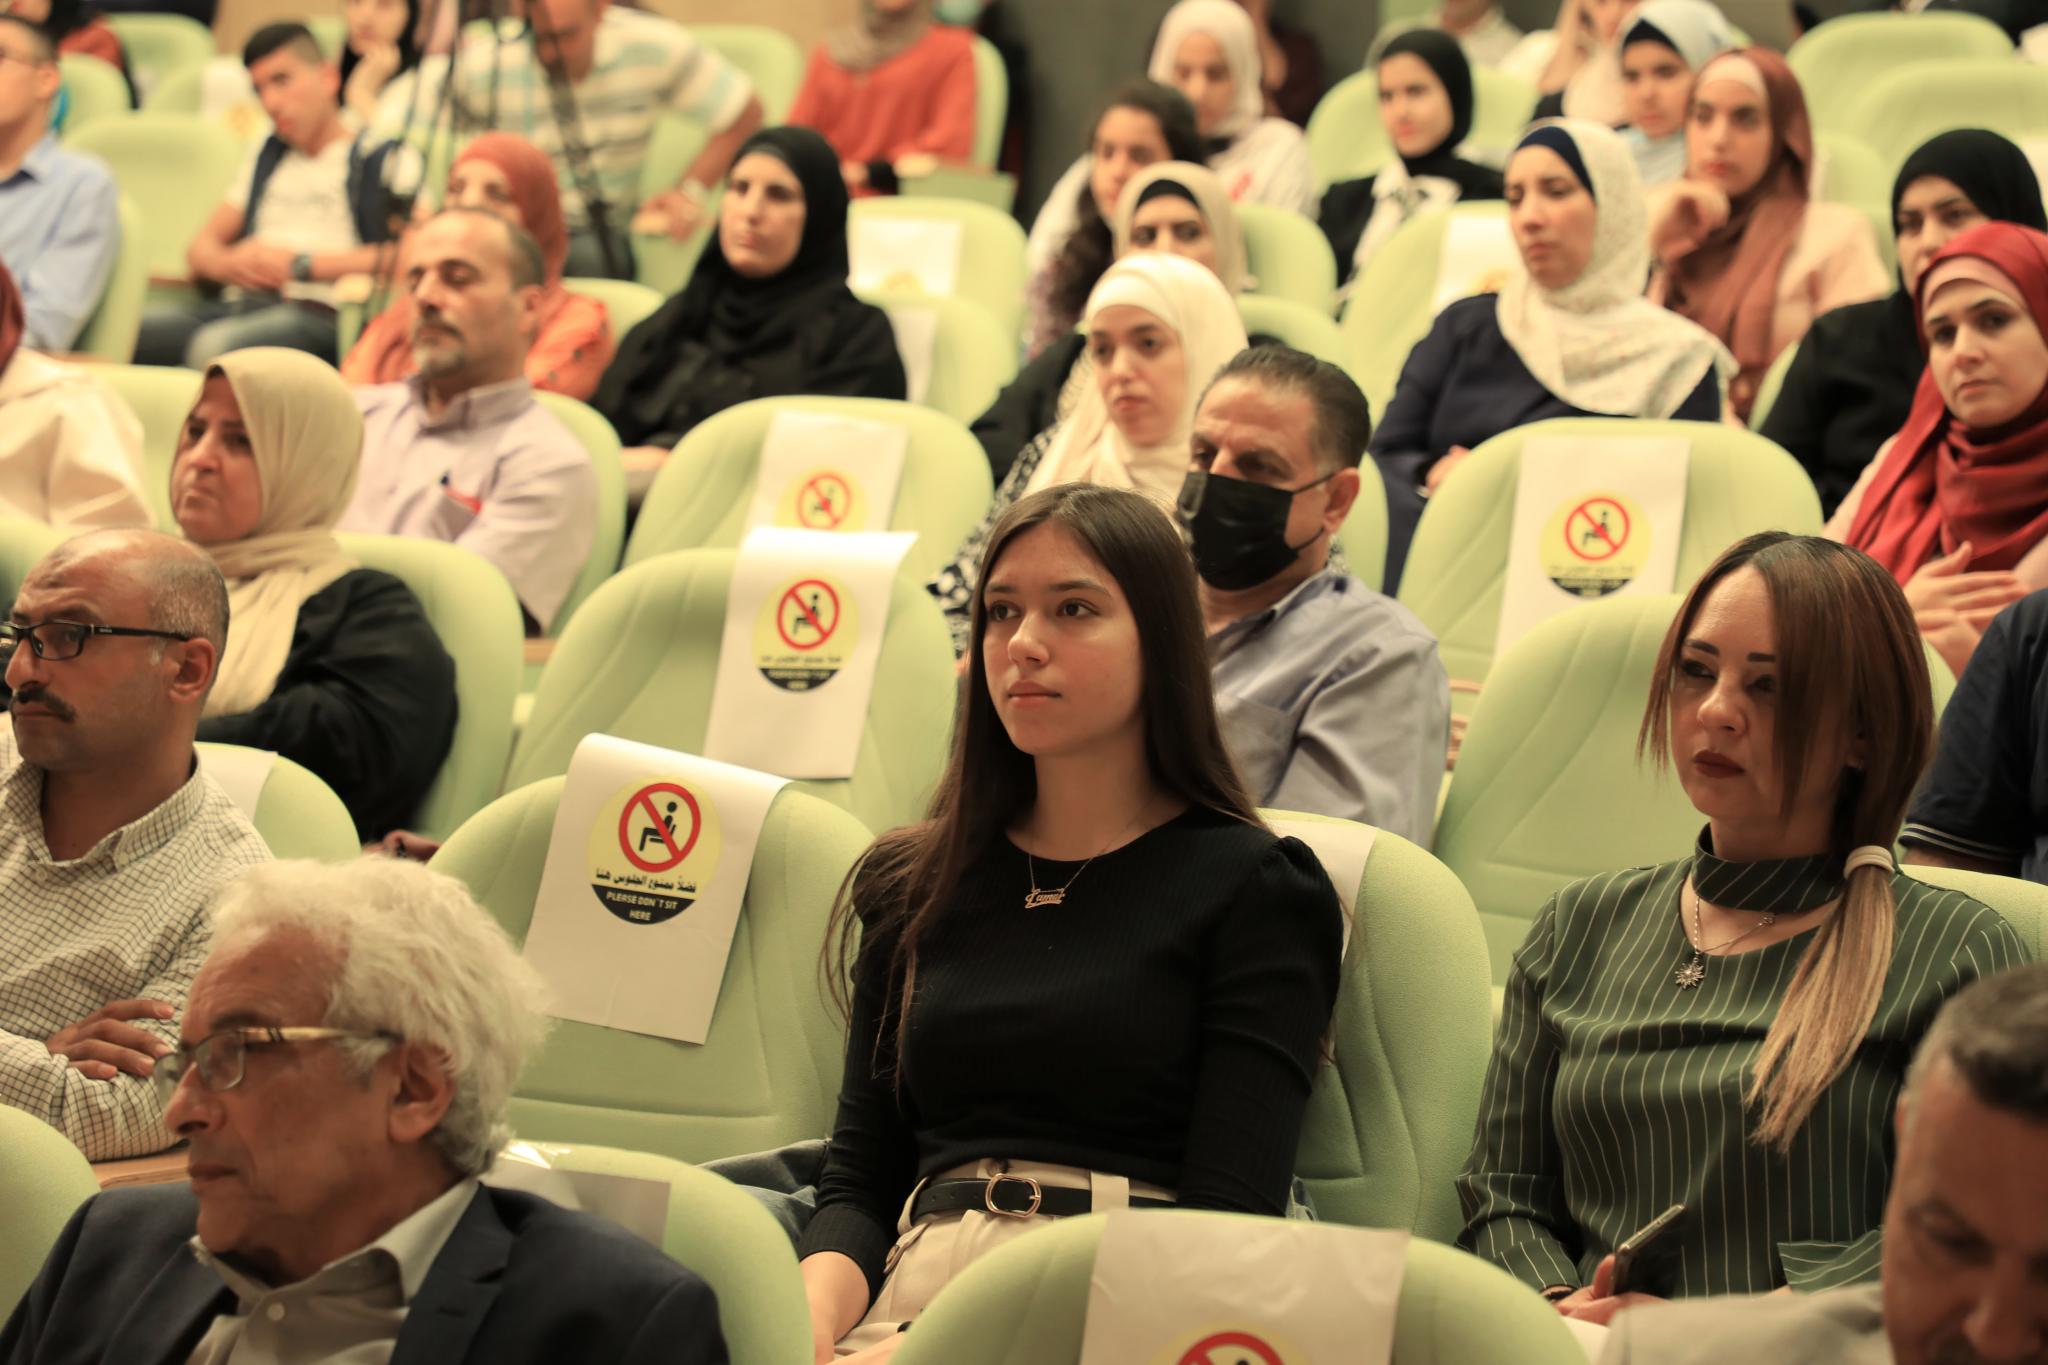 AAUP and the Ministry of Education Honor School Students who Won in the Competitions that AAUP Organized